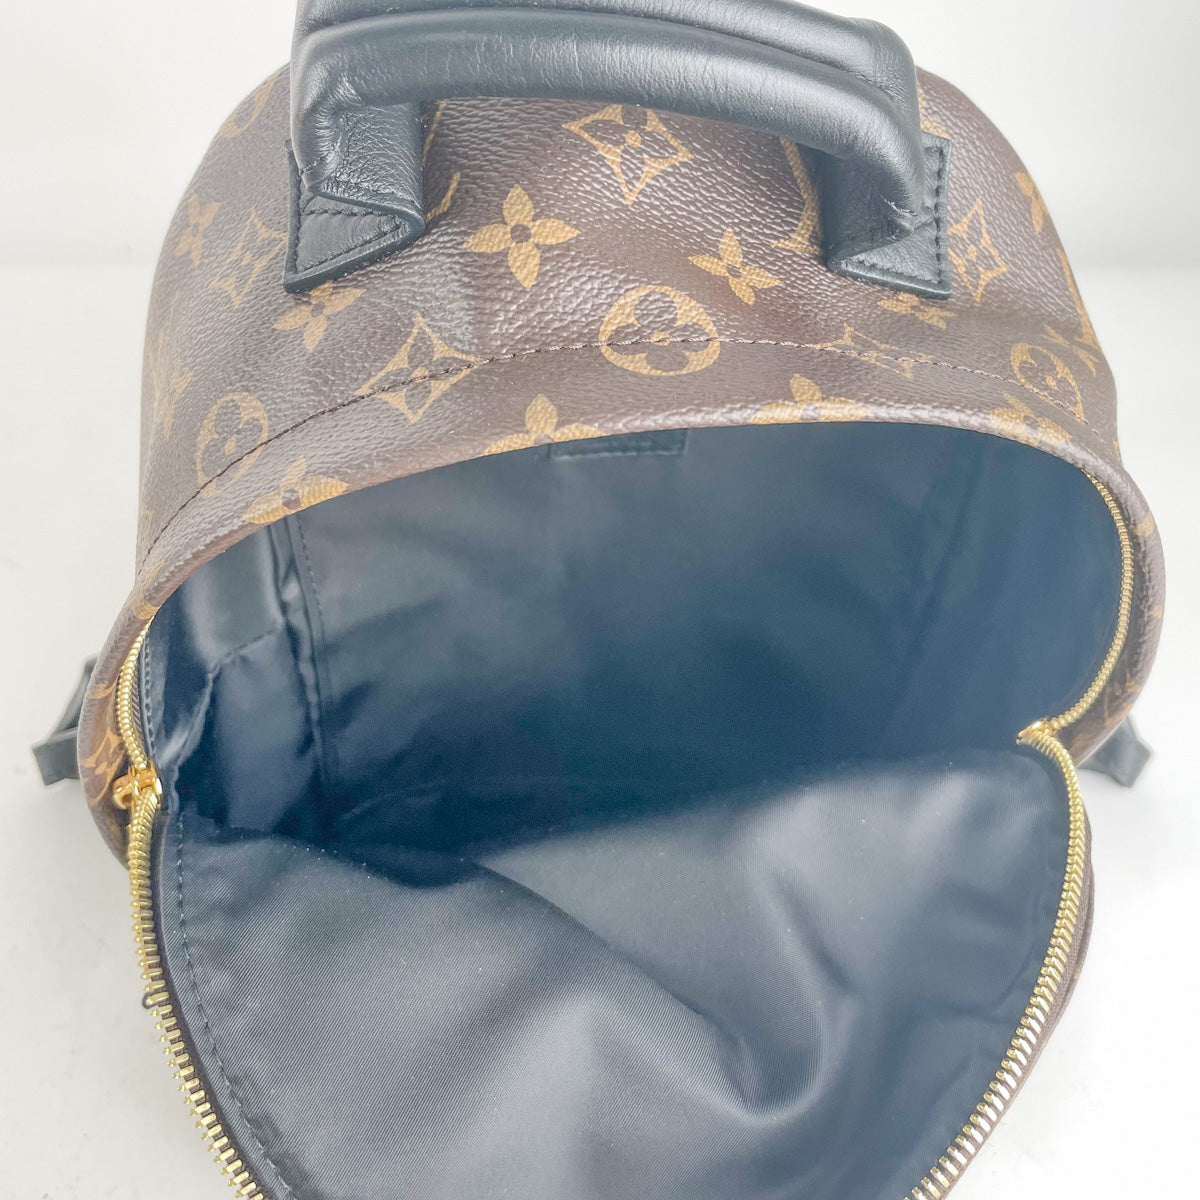 Louis Vuitton Palm Springs Backpack Backpack 359297